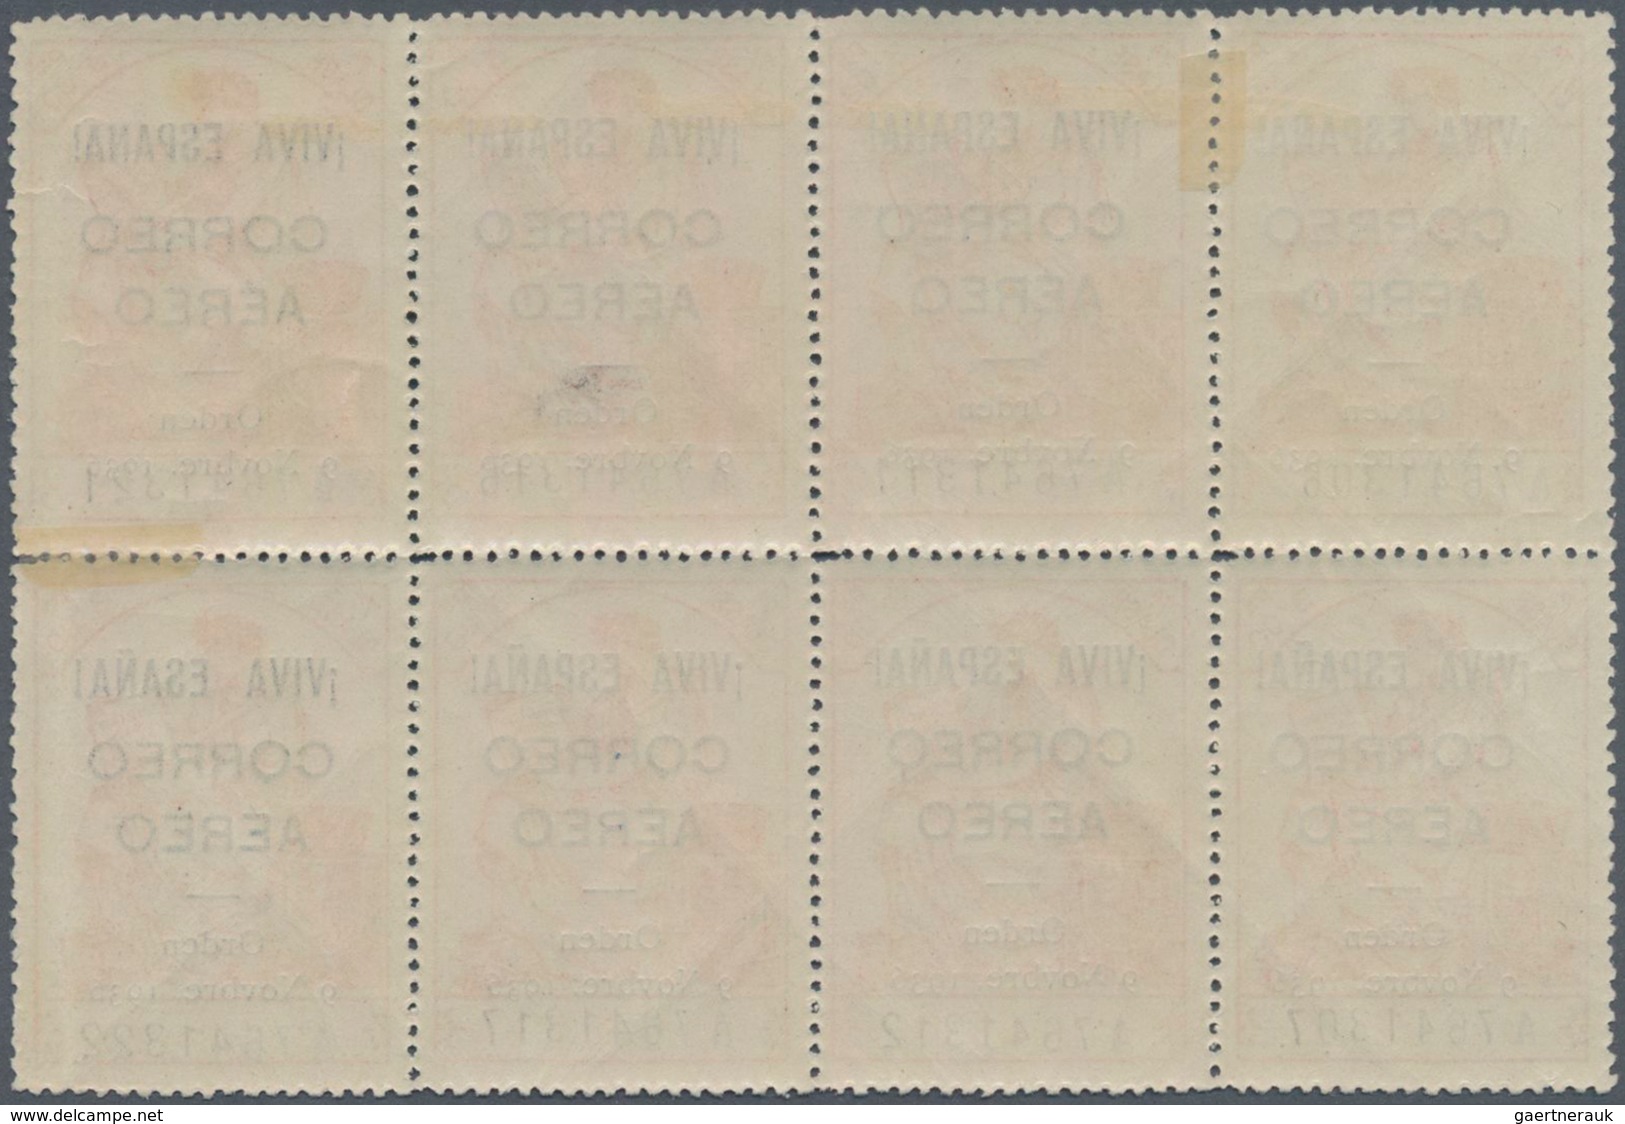 Spanien - Lokalausgaben: Burgos: 1936, Airmail Overprints On Fiscal Stamp 3pts. Rose, Block Of Eight - Other & Unclassified